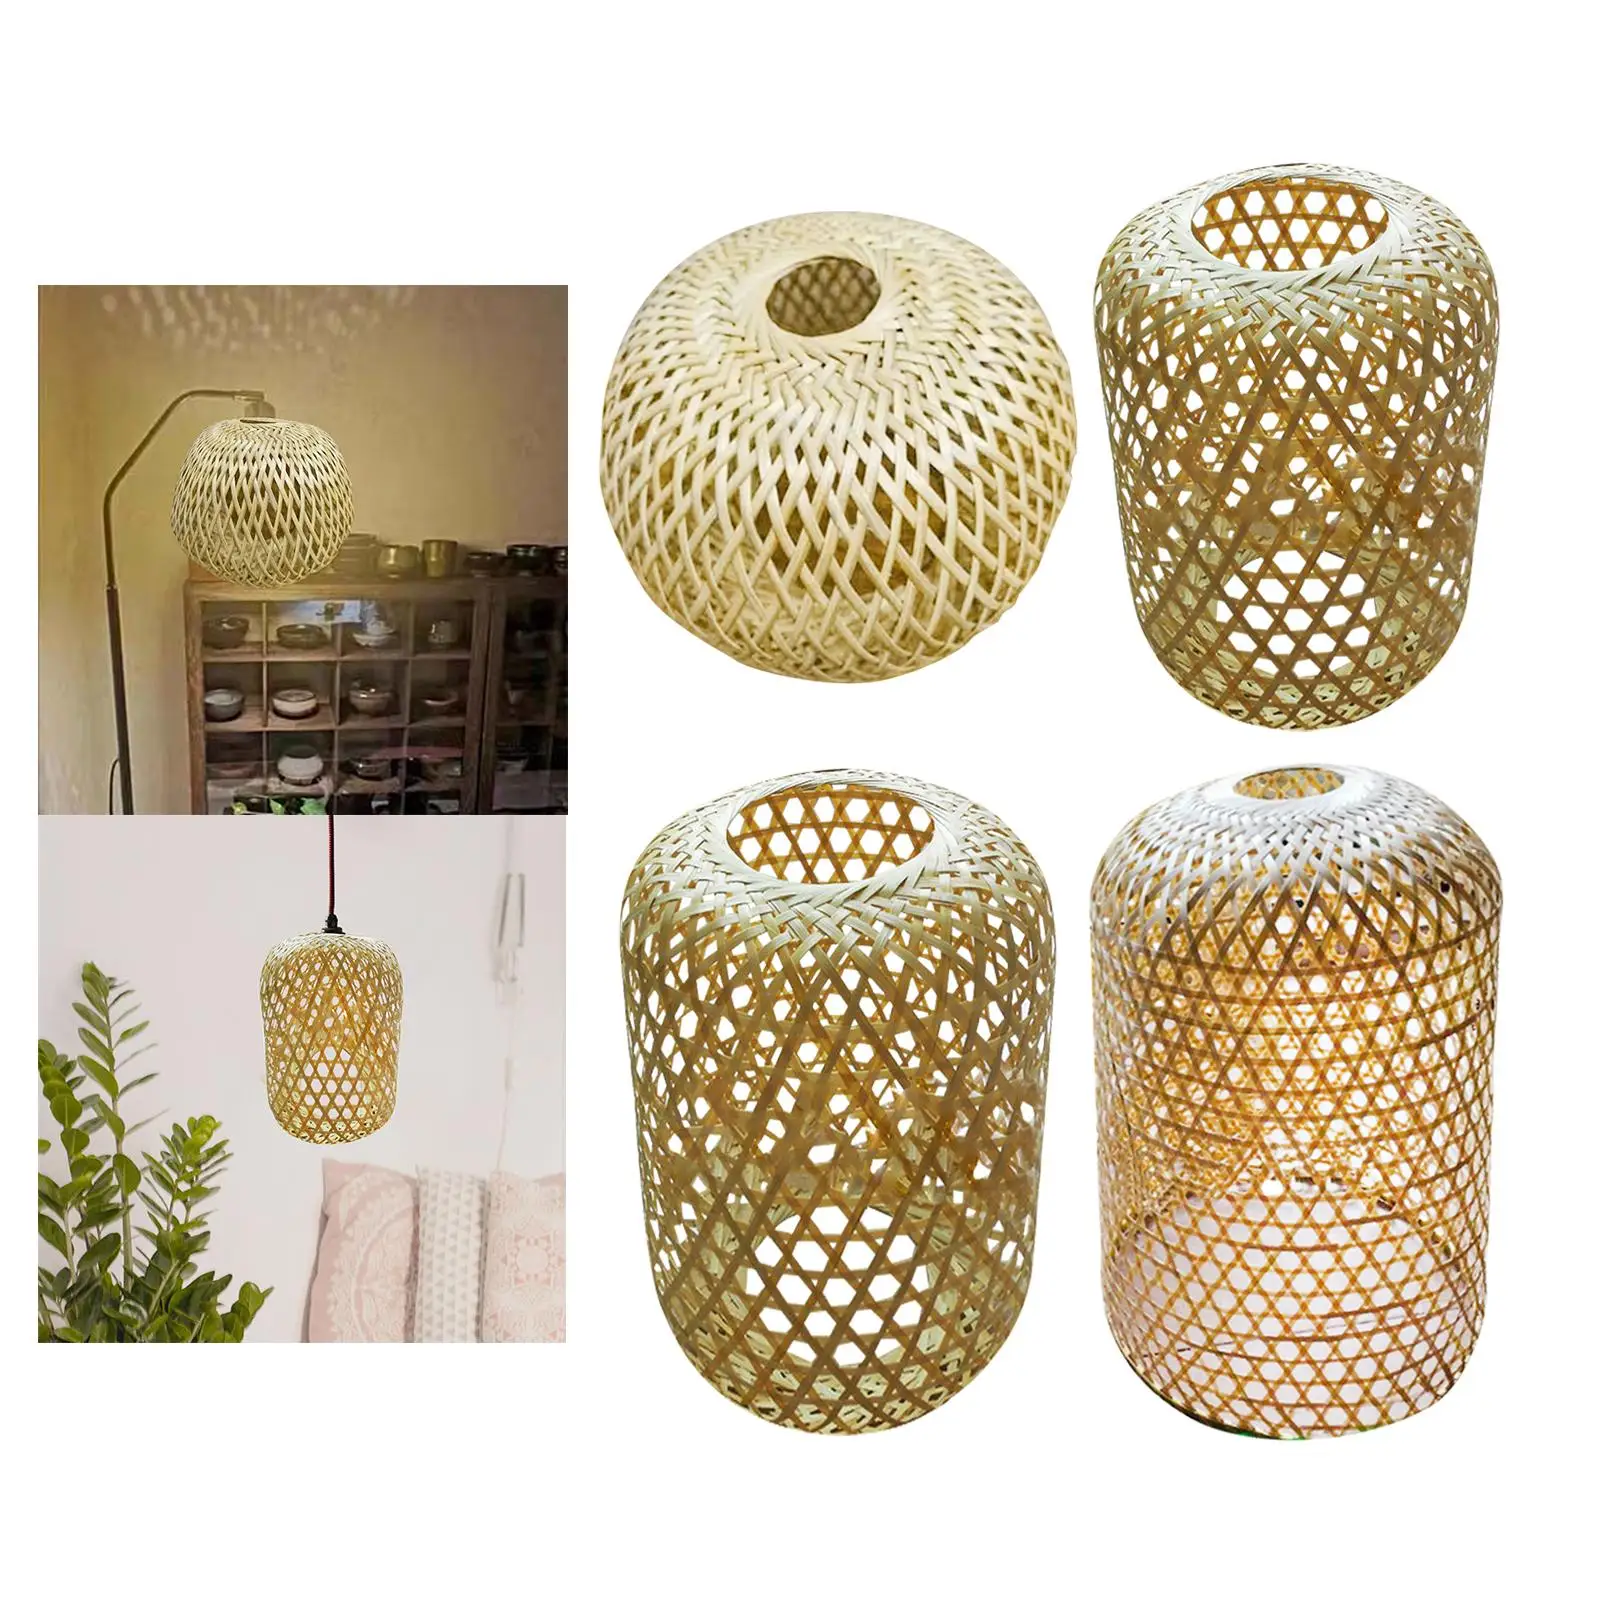 Bamboo Lamp Shade, Pendant Light Cover Art Crafts Lamp Accessory for Kitchen Decor